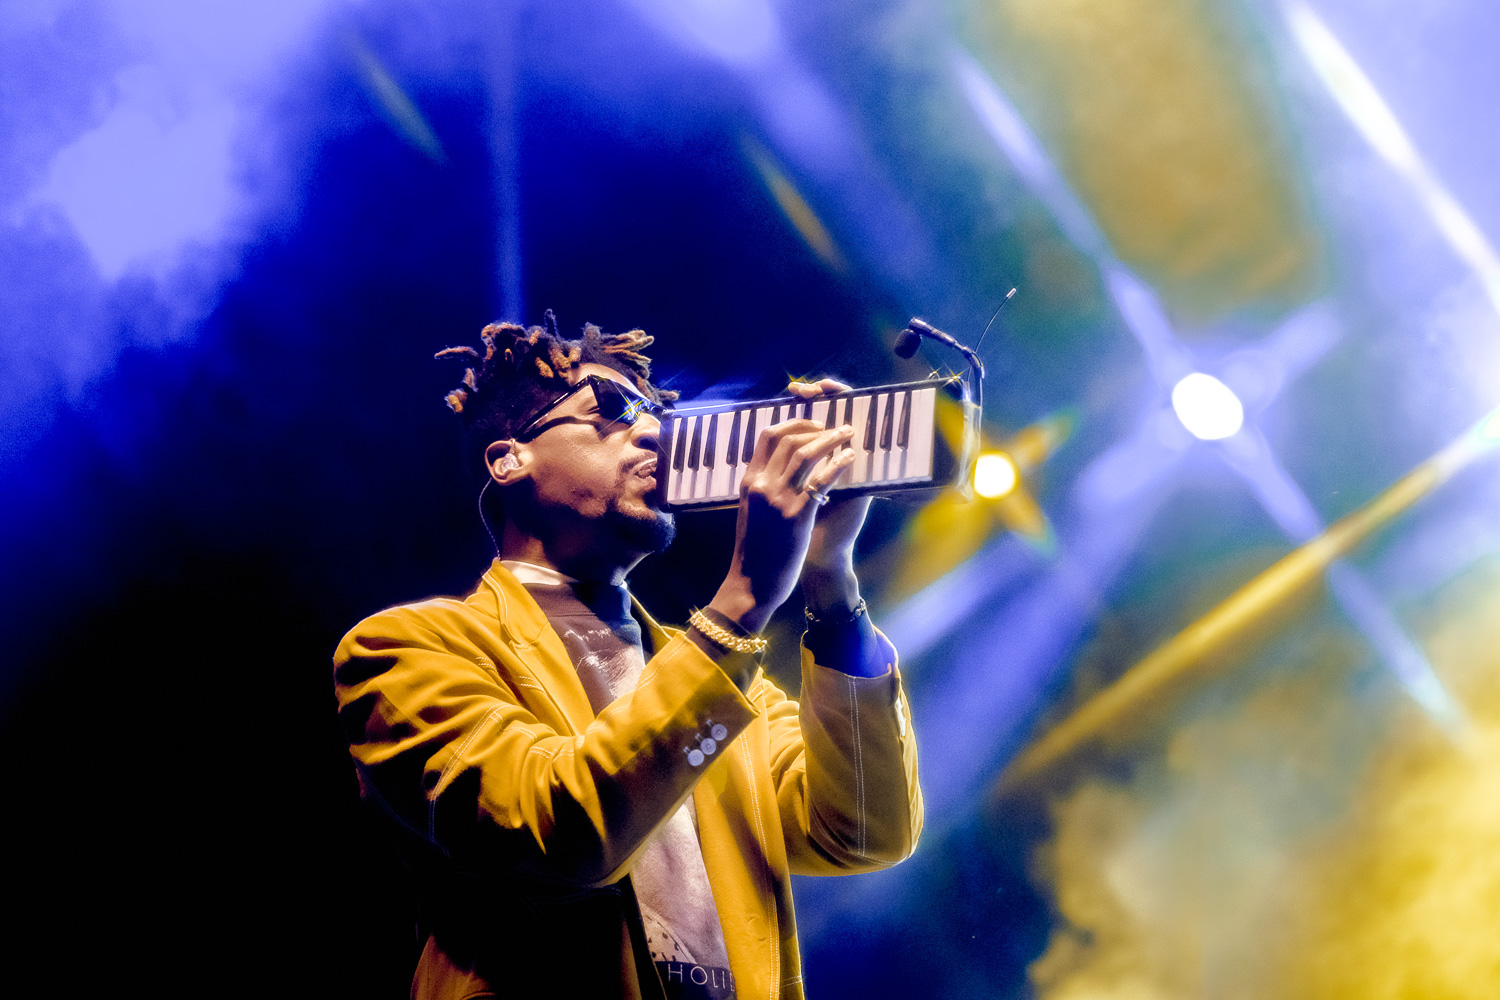 John Batiste plays melodica while blue and yellow lights create a star burst in background.